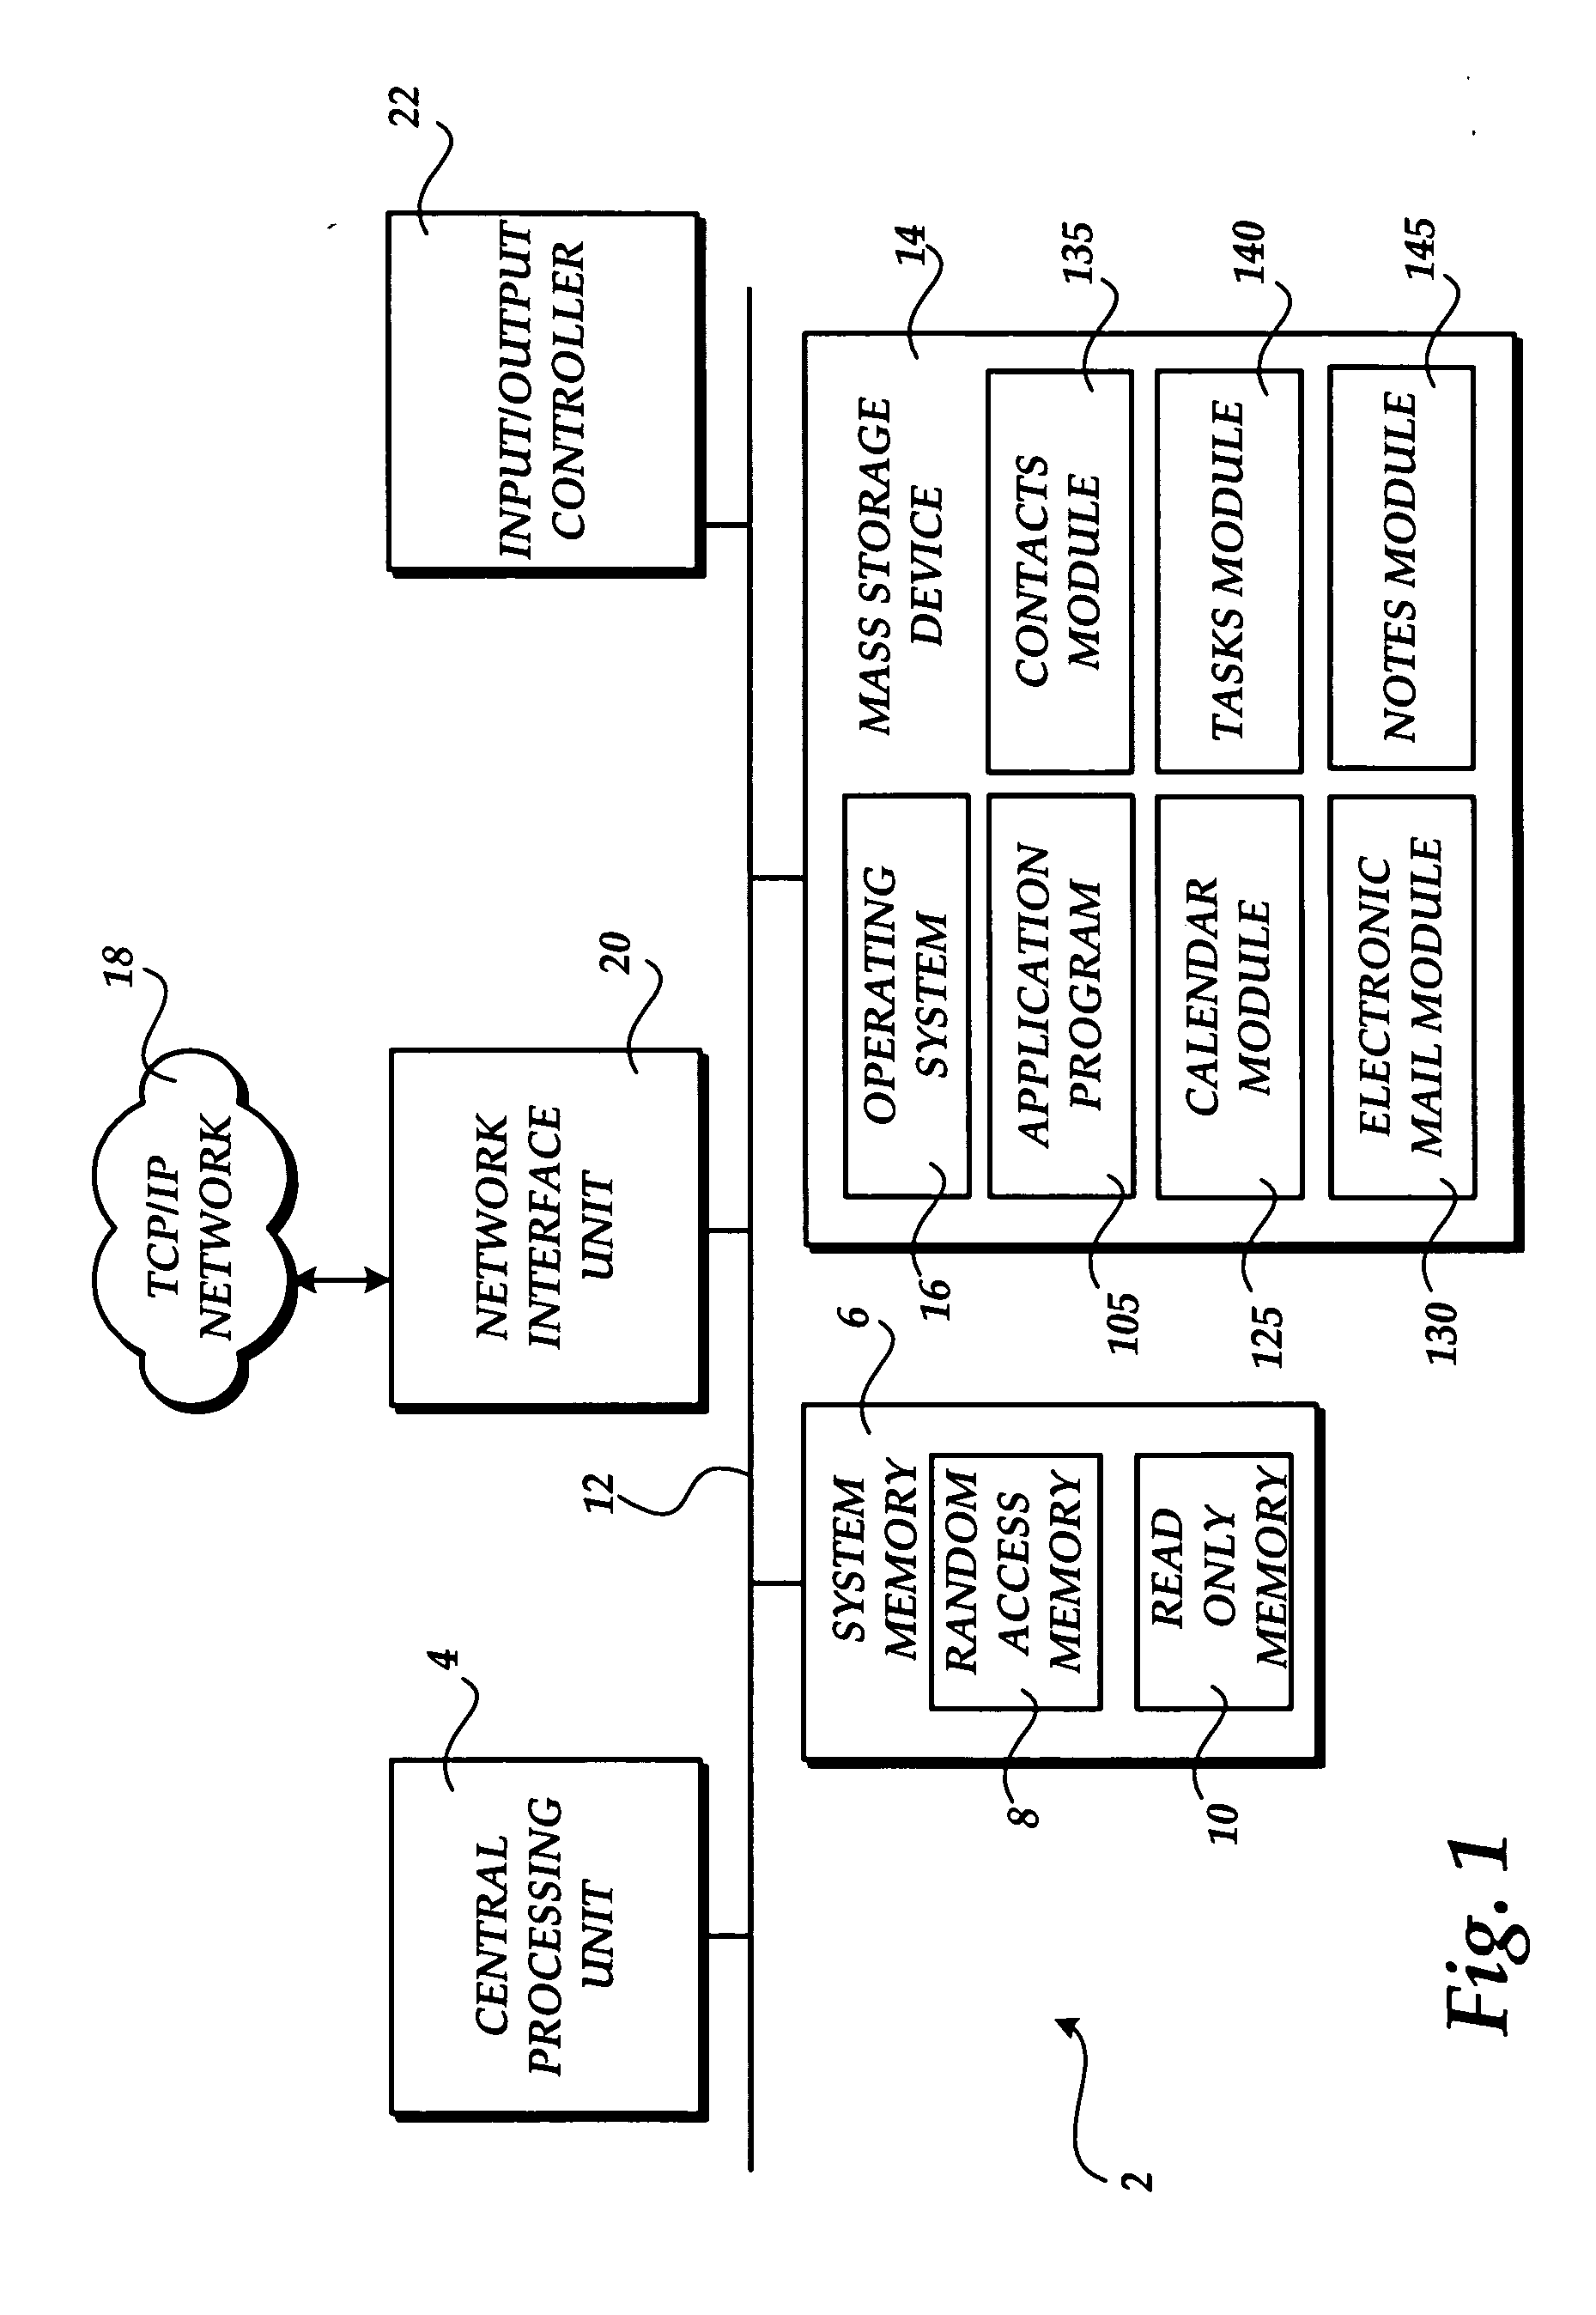 Combined content selection and display user interface